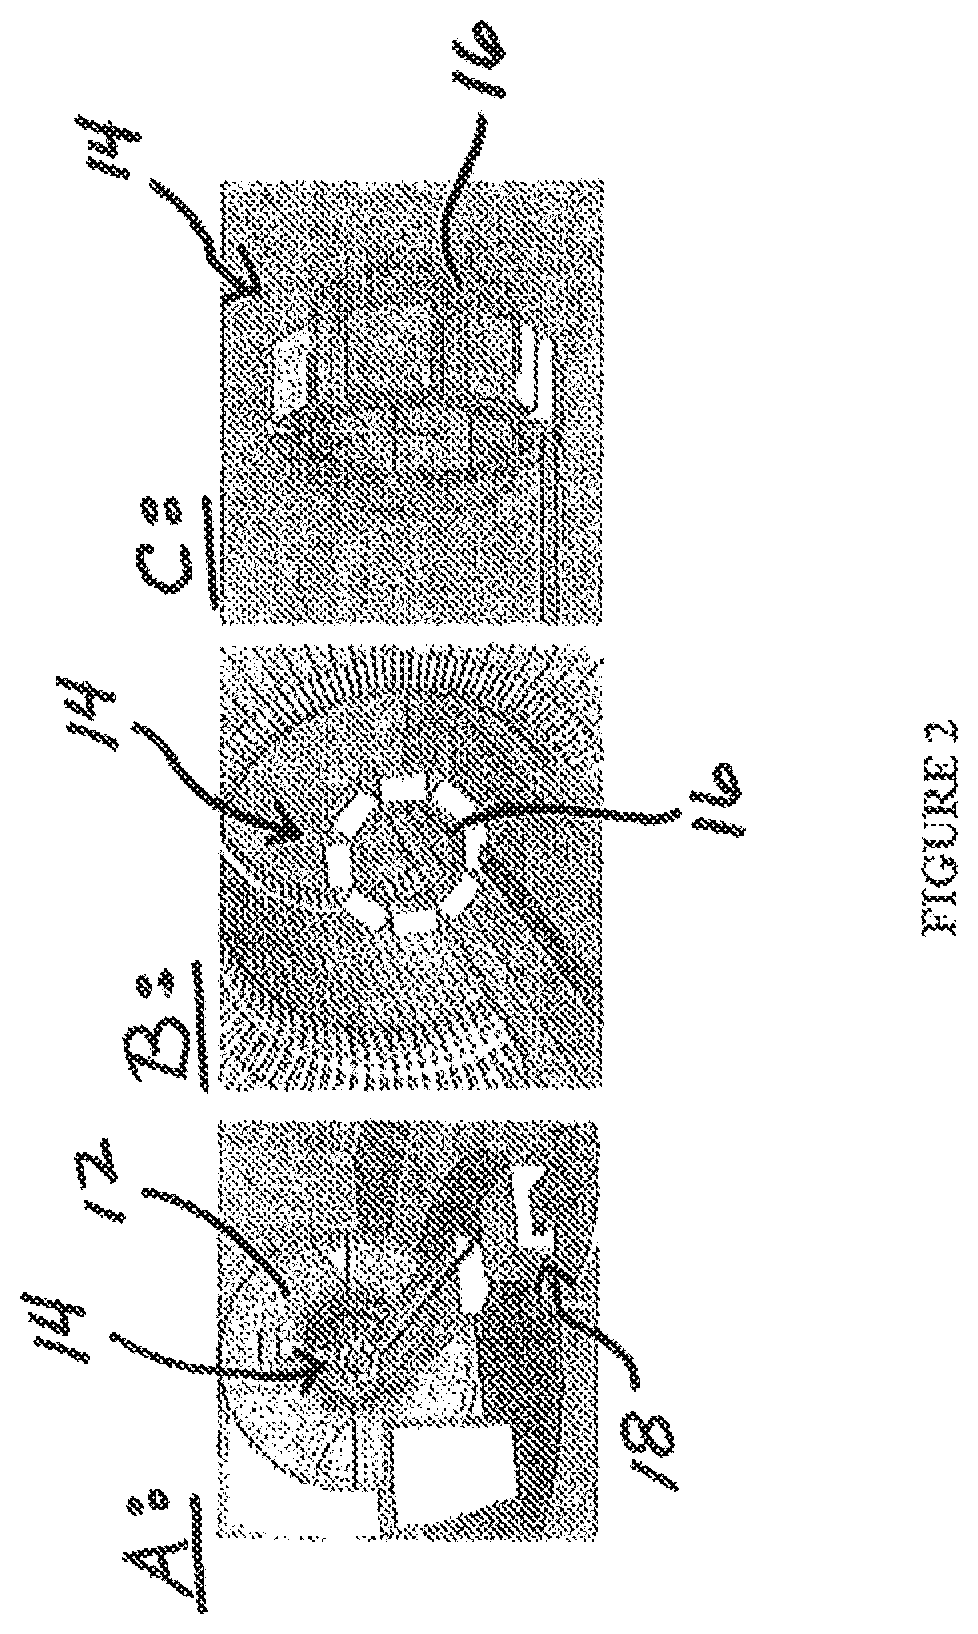 Apparatus and implementation method of a set of universal compact portable MR-compatible PET inserts to convert whole-body MRI scanners into organ-specific hybrid PET/MRI imagers